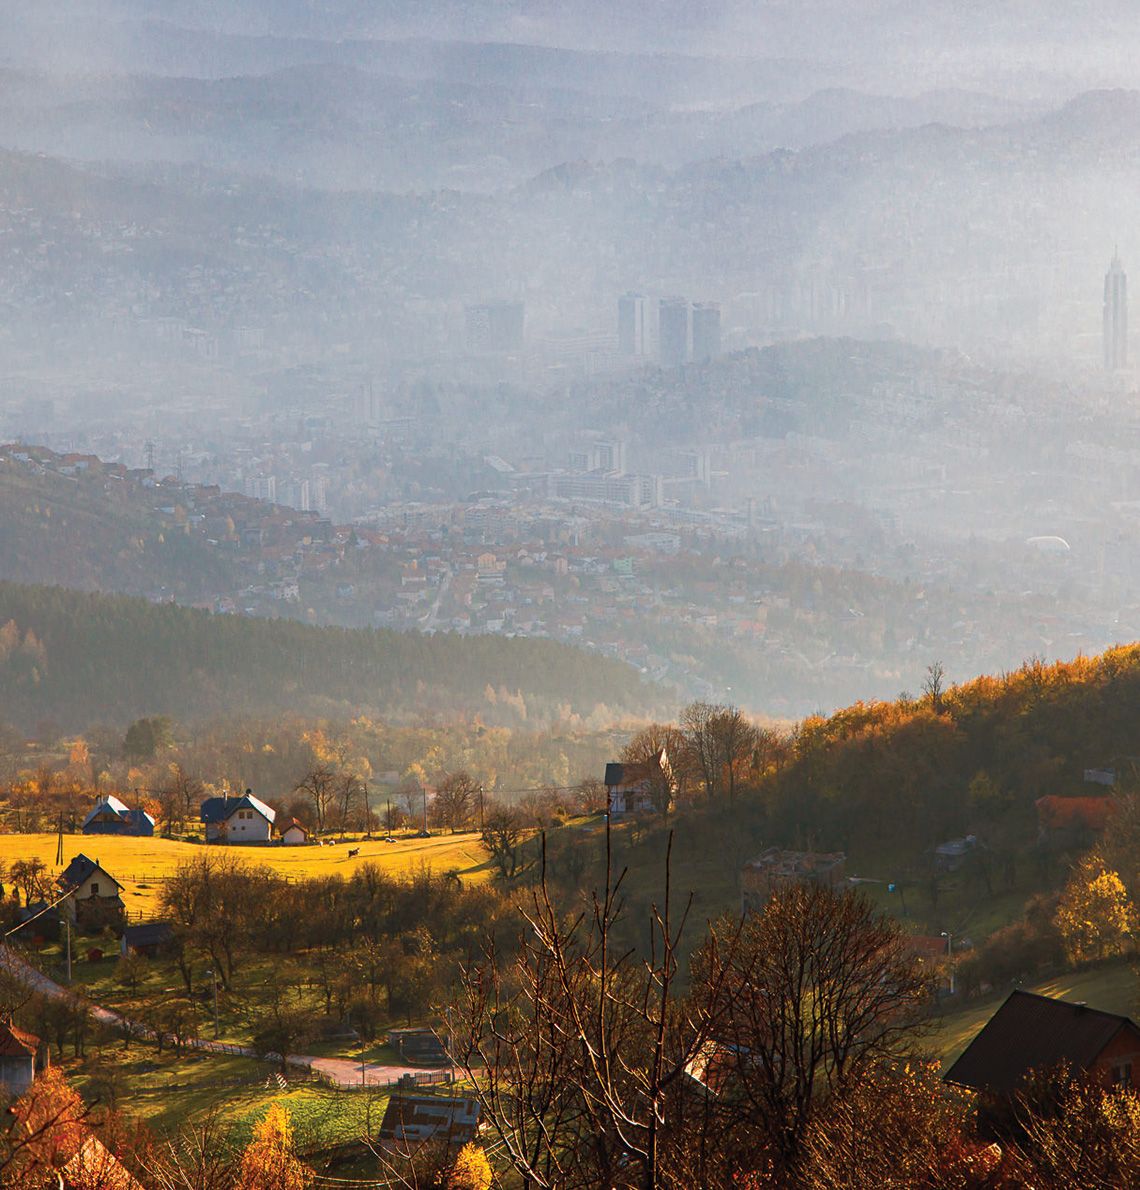 Programme component 2 (PC 2): Supporting the transition of coal regions in BiH